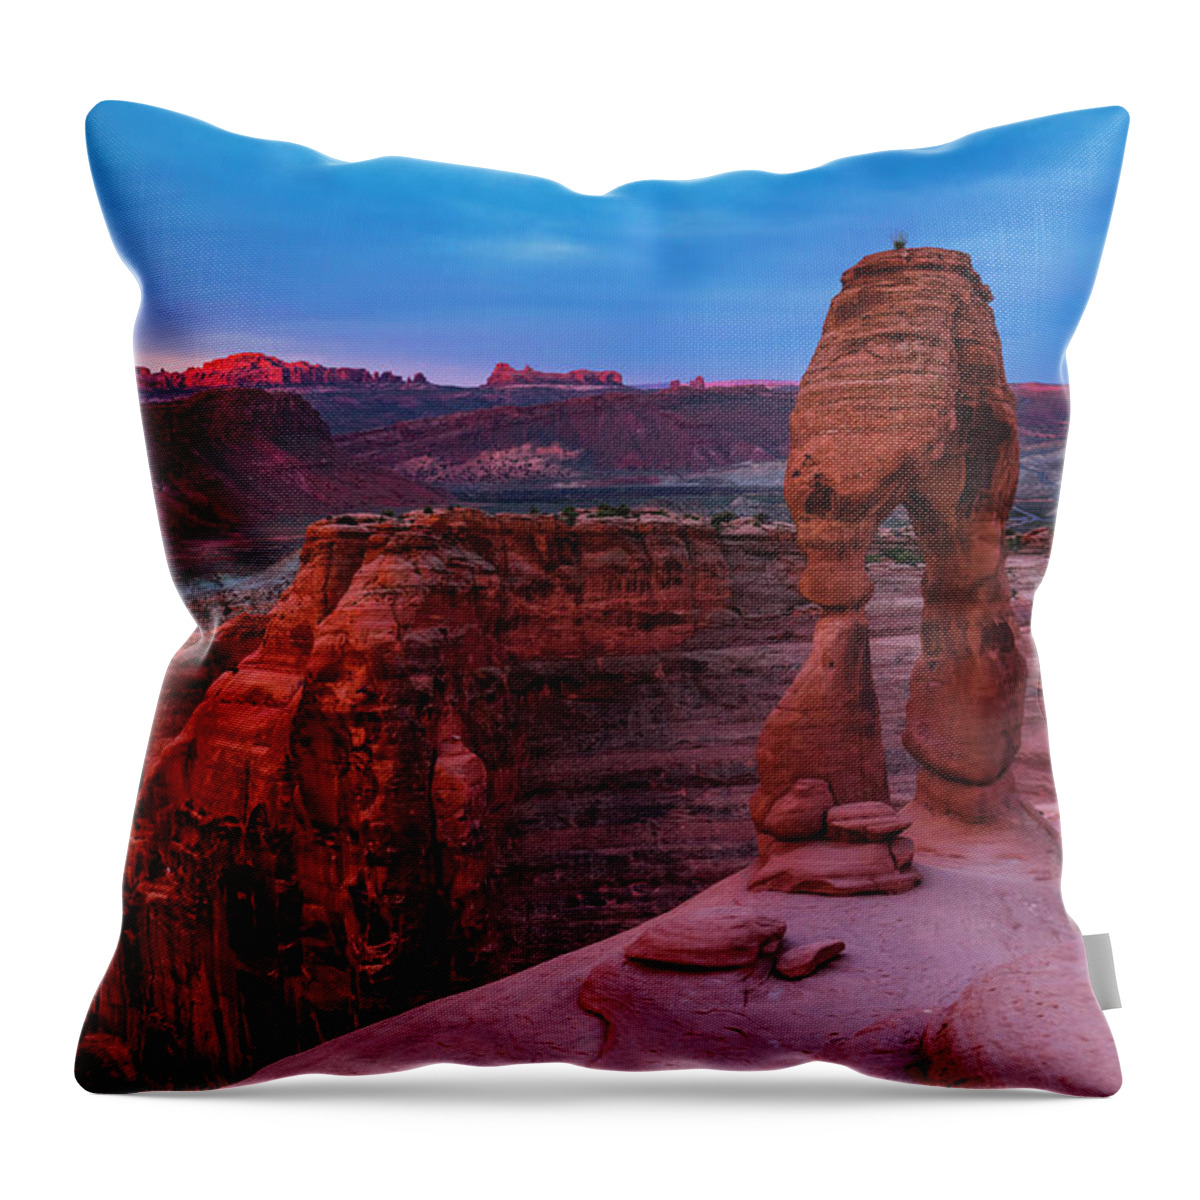 Estock Throw Pillow featuring the digital art Arches National Park, Utah #3 by Maurizio Rellini